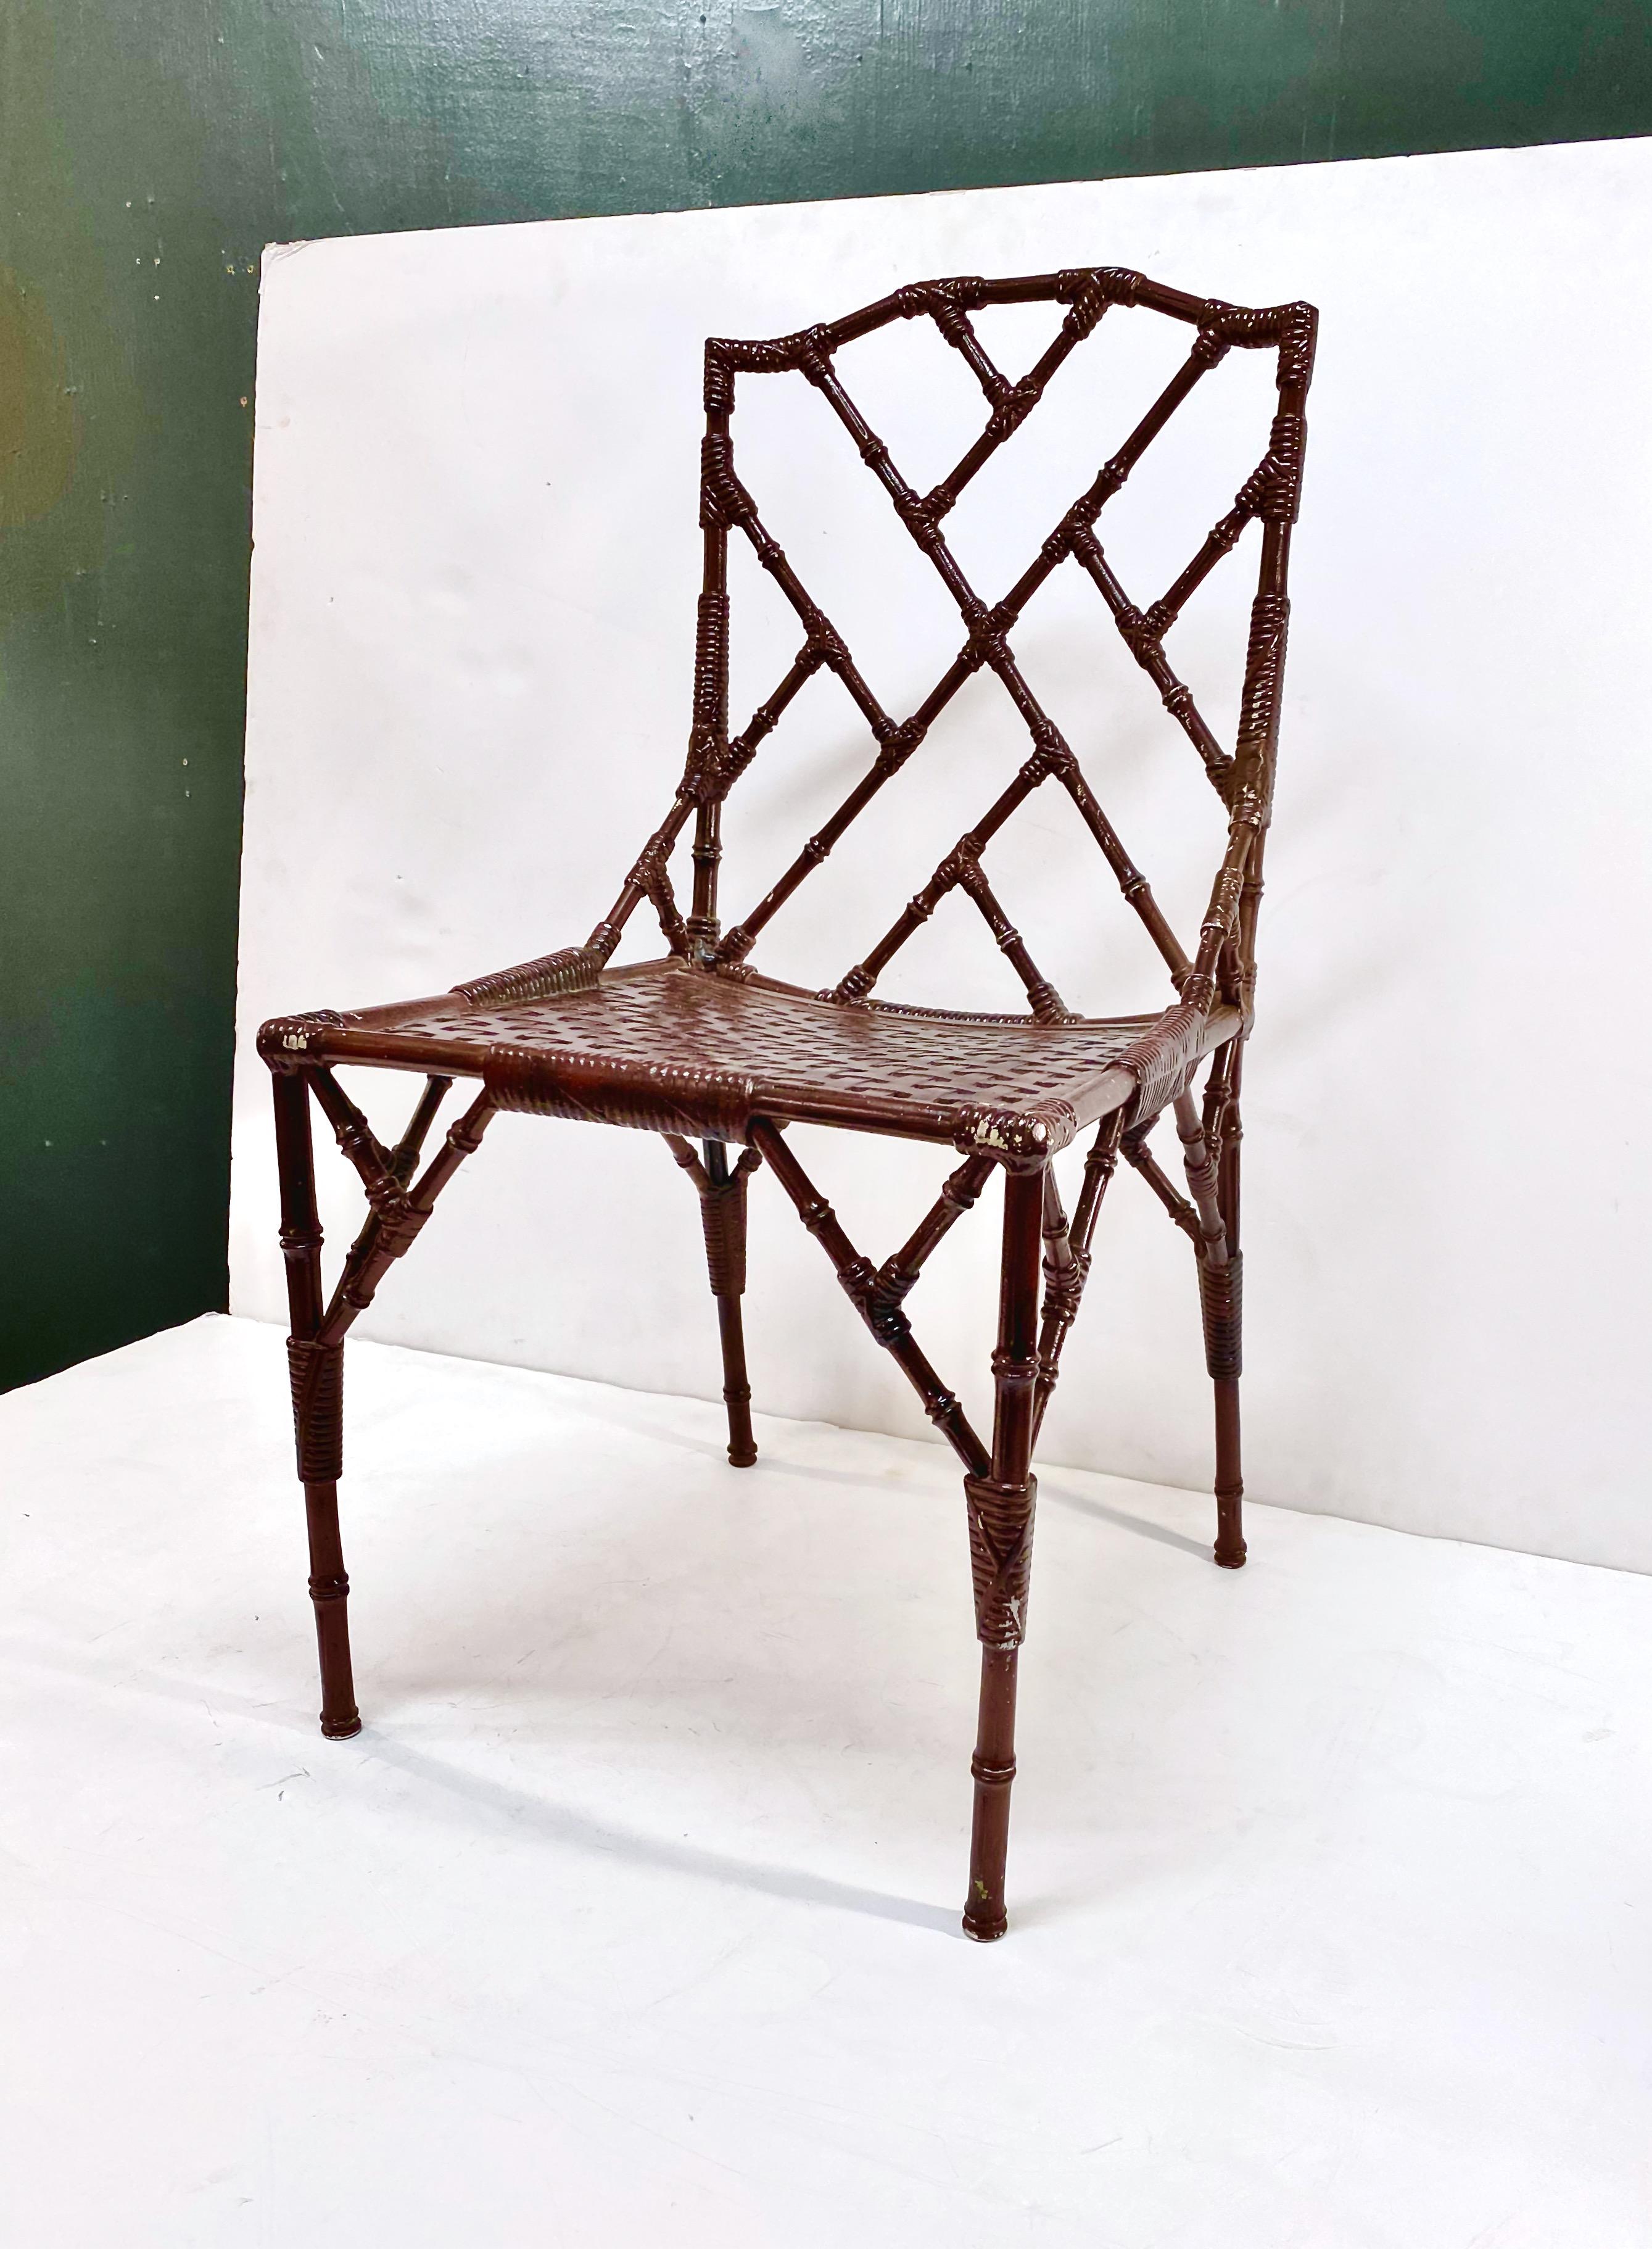 Set of Four Faux Bamboo Chairs and Table, c. 1970-1980 For Sale 1